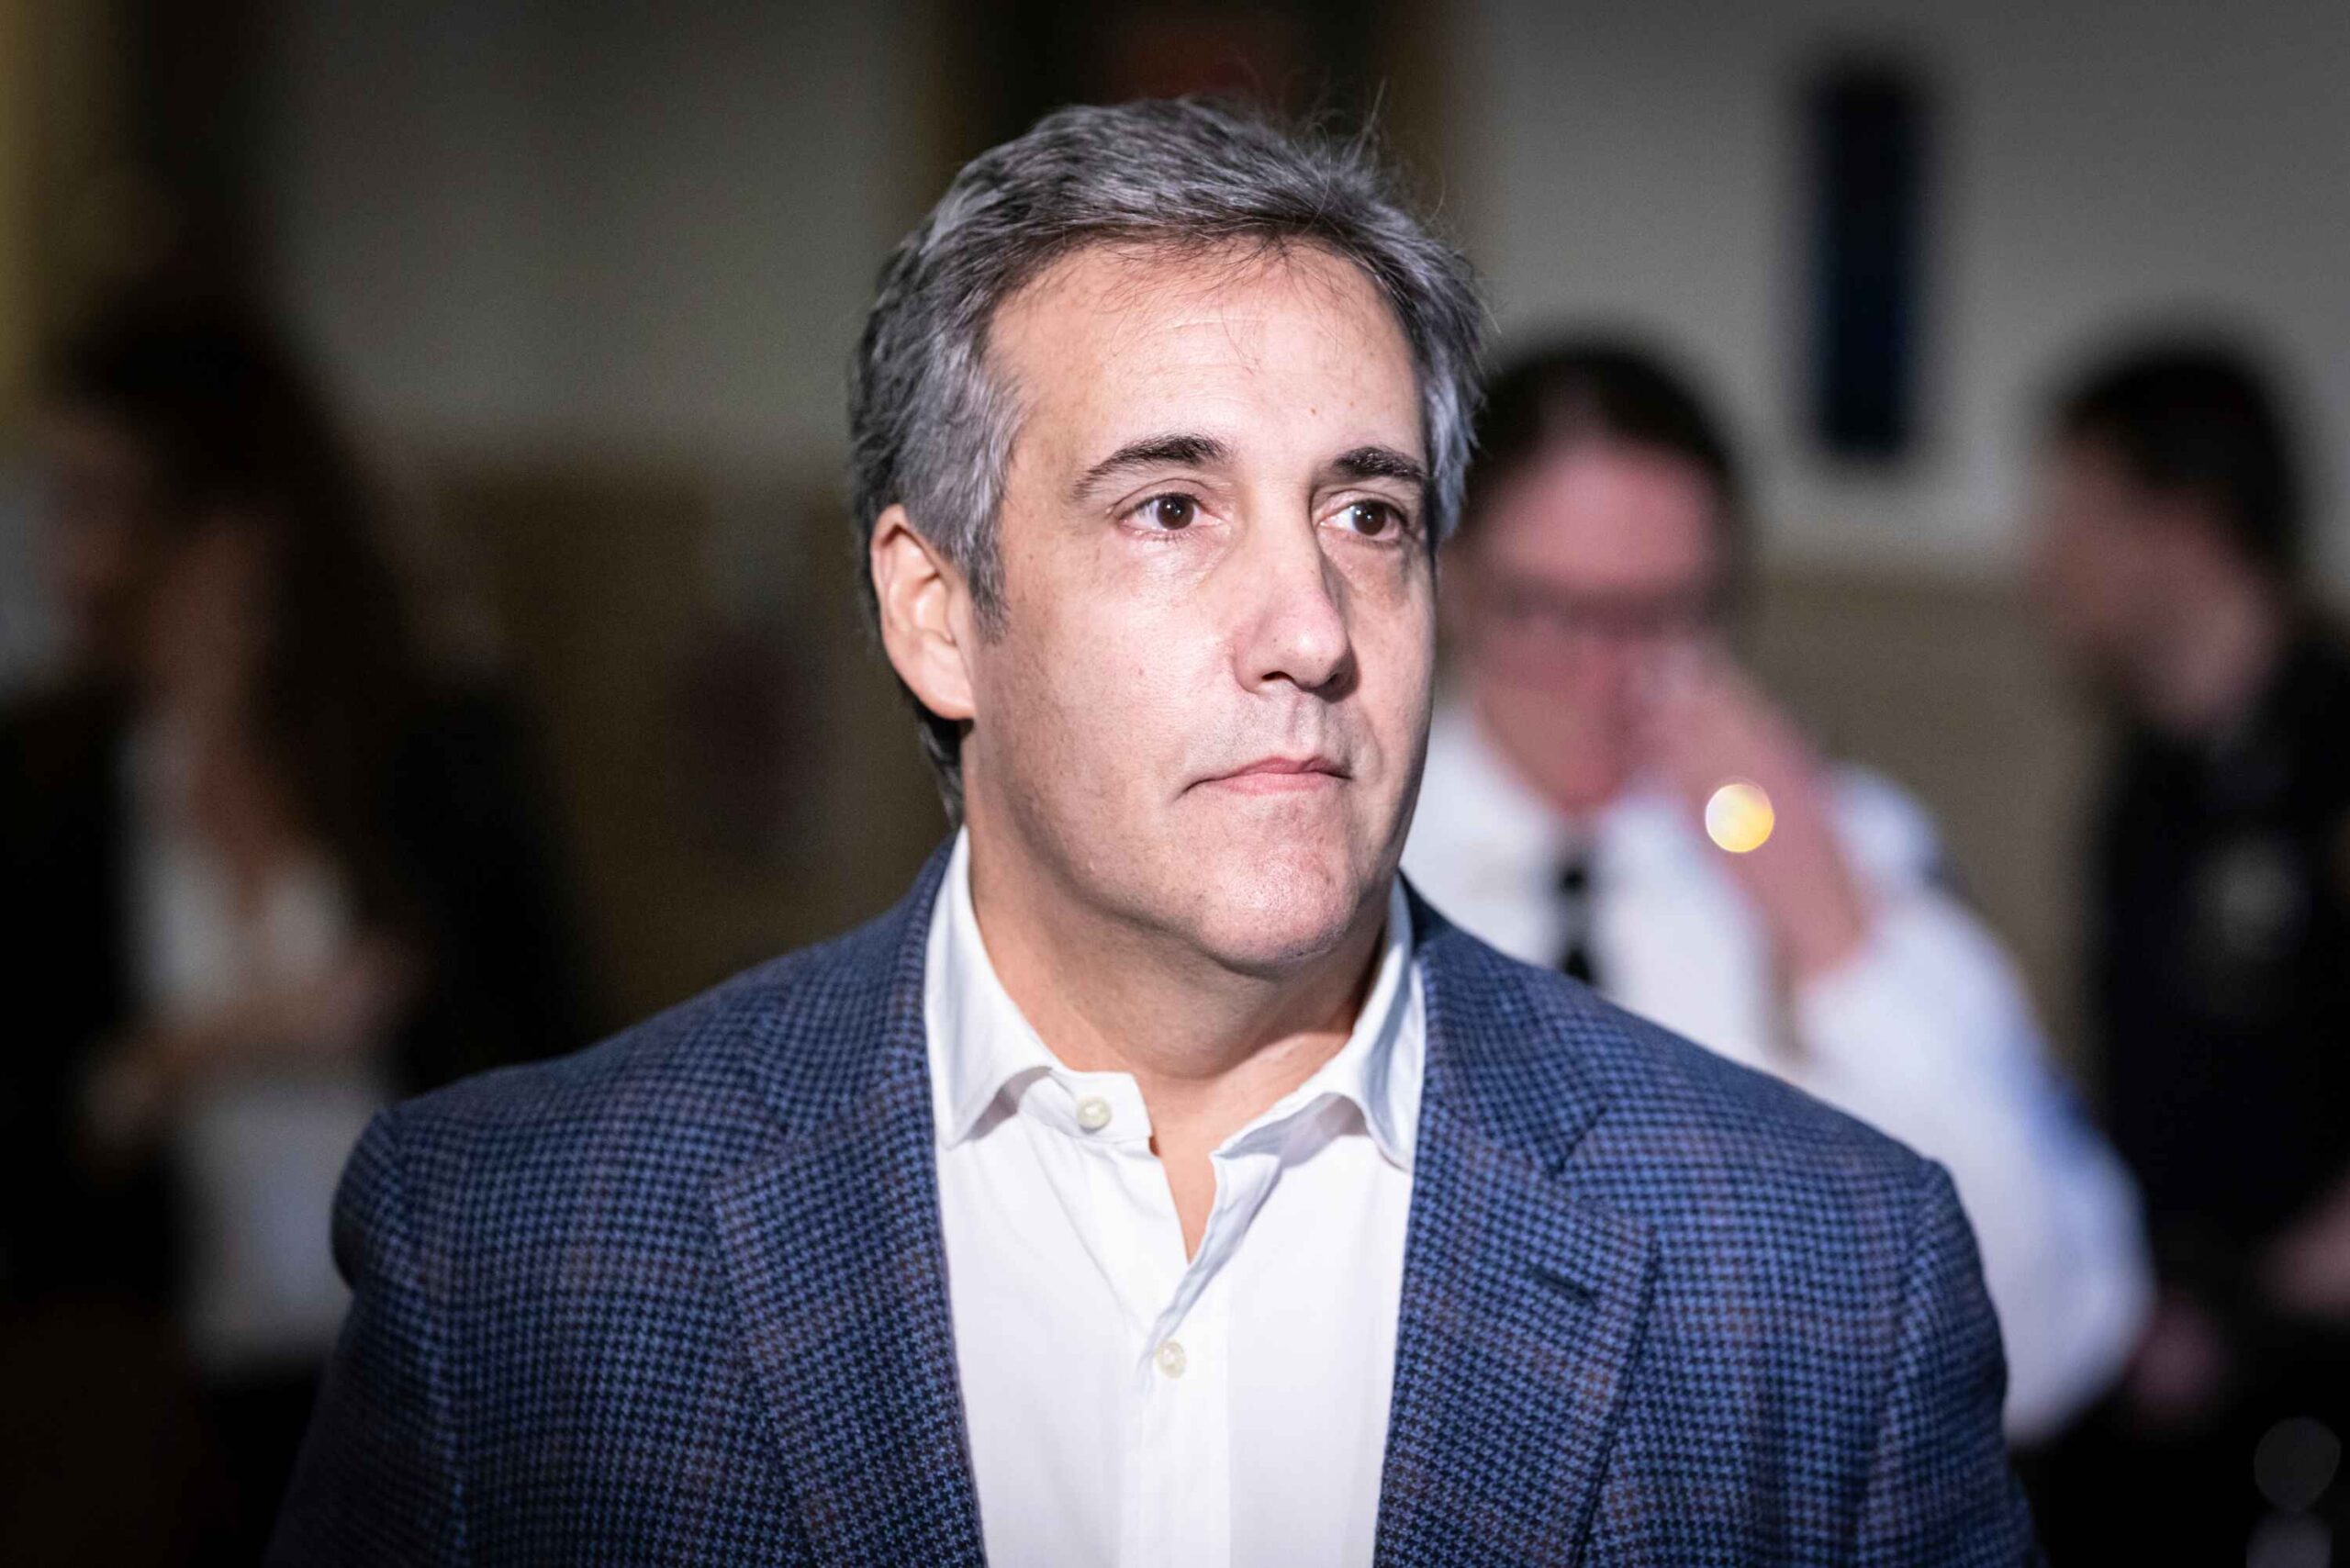 Disgraced former attorney Michael Cohen testified in the New York fraud trial against Donald Trump, claiming he helped overinflate the value of Trump's assets.